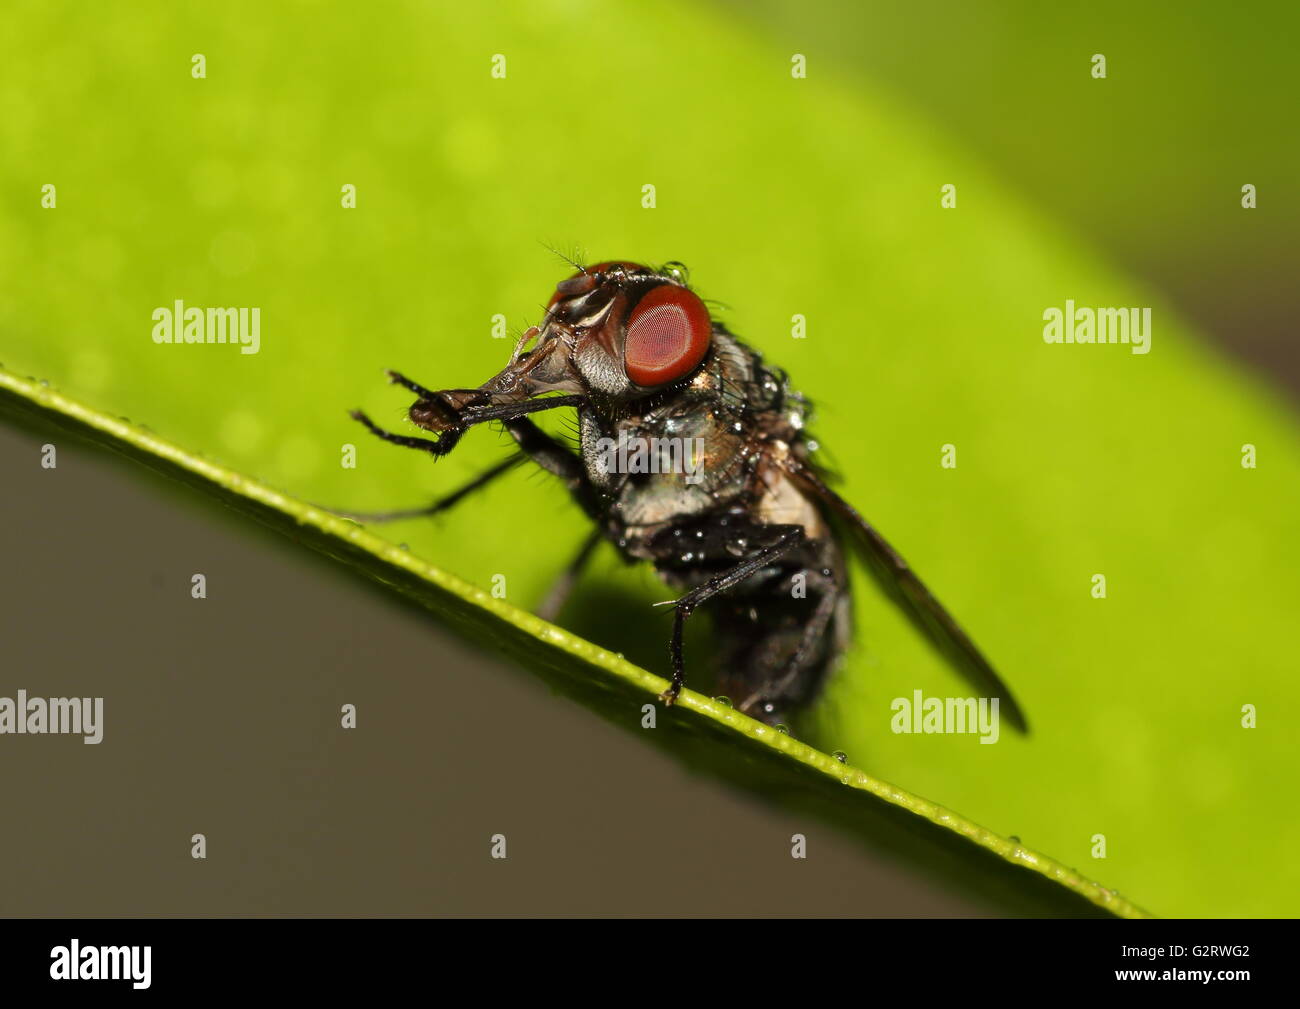 Fly with its tongue protruding while cleaning itself.  Fly's tongue is also called labellum or proboscis. Stock Photo